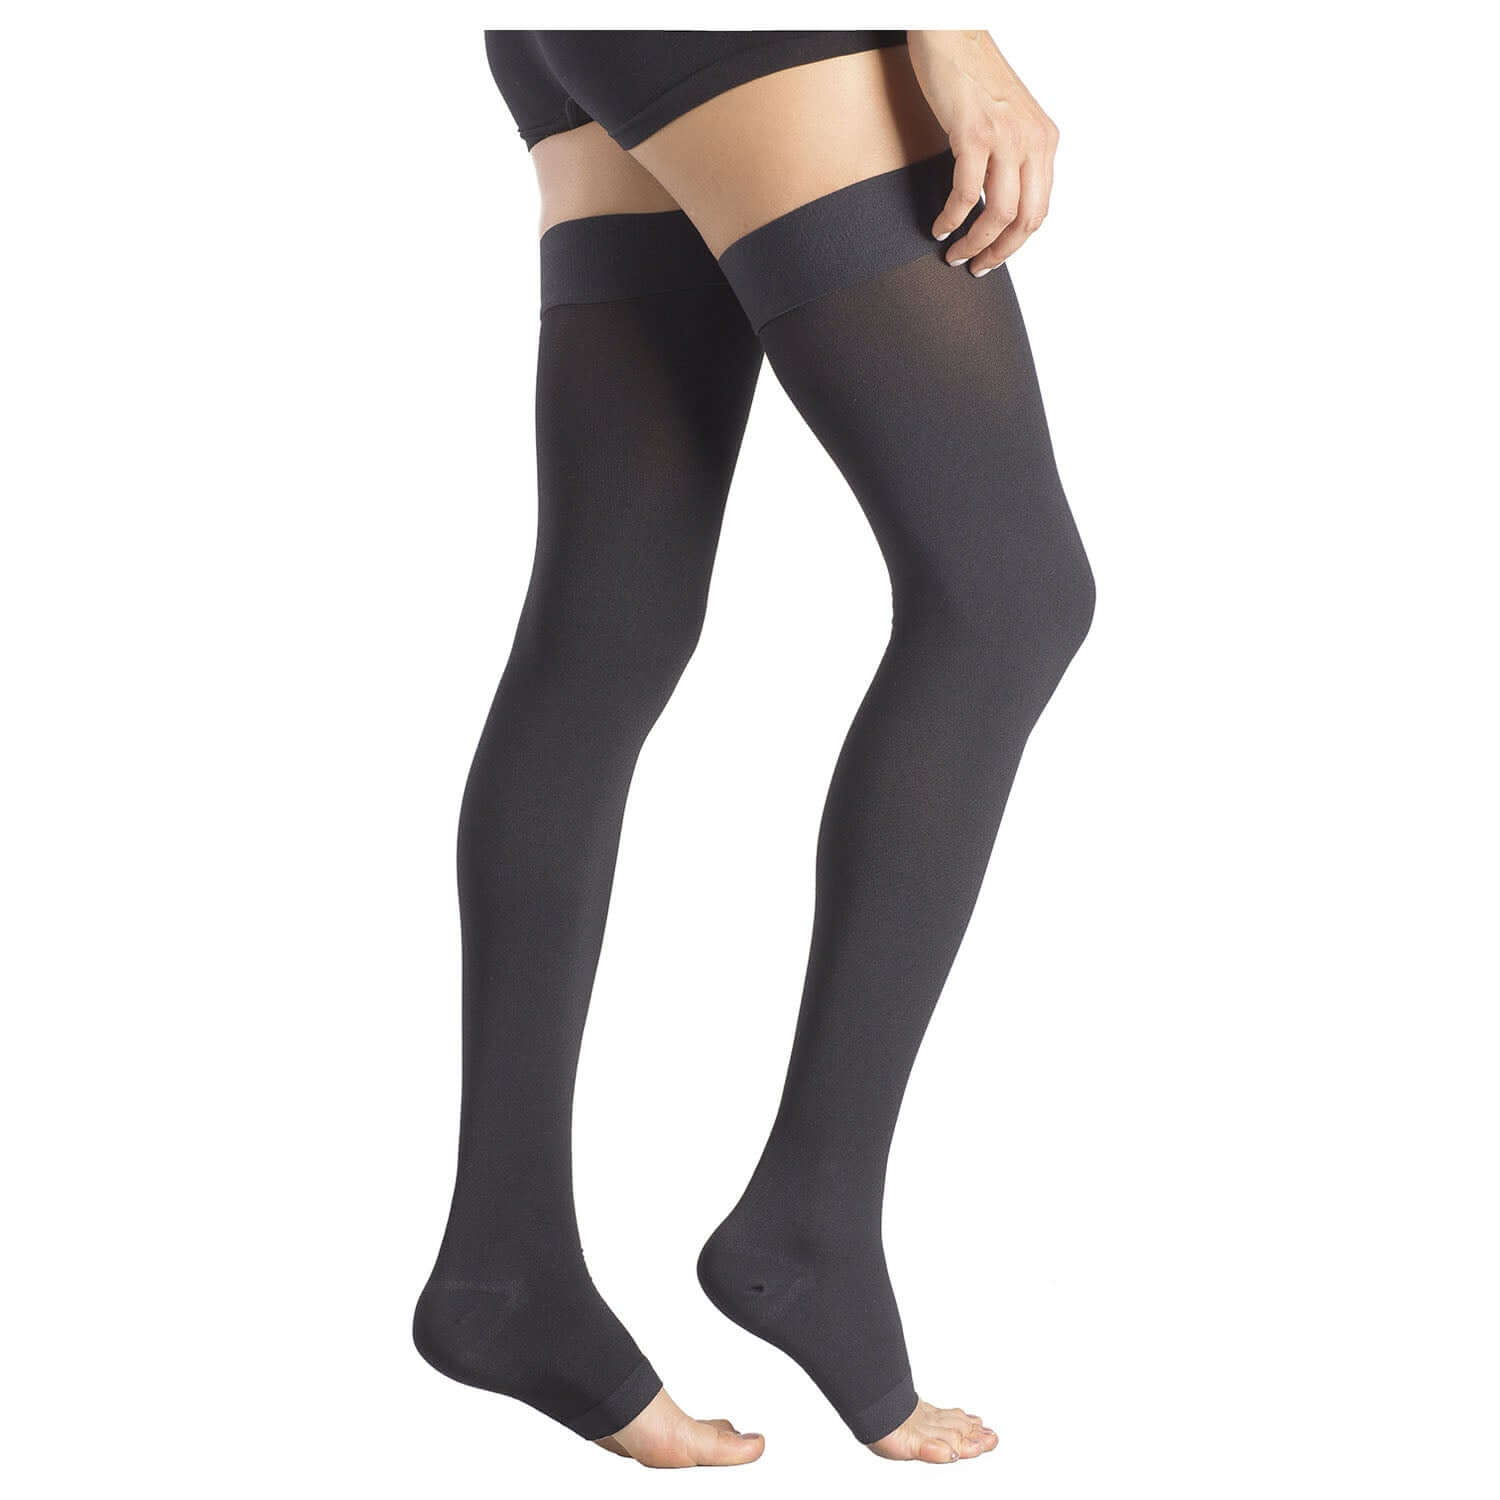 Thigh High Graduated Compression Opaque Stockings, Open-Toe 20-30mmHg Firm Medical Support Socks - md-diab